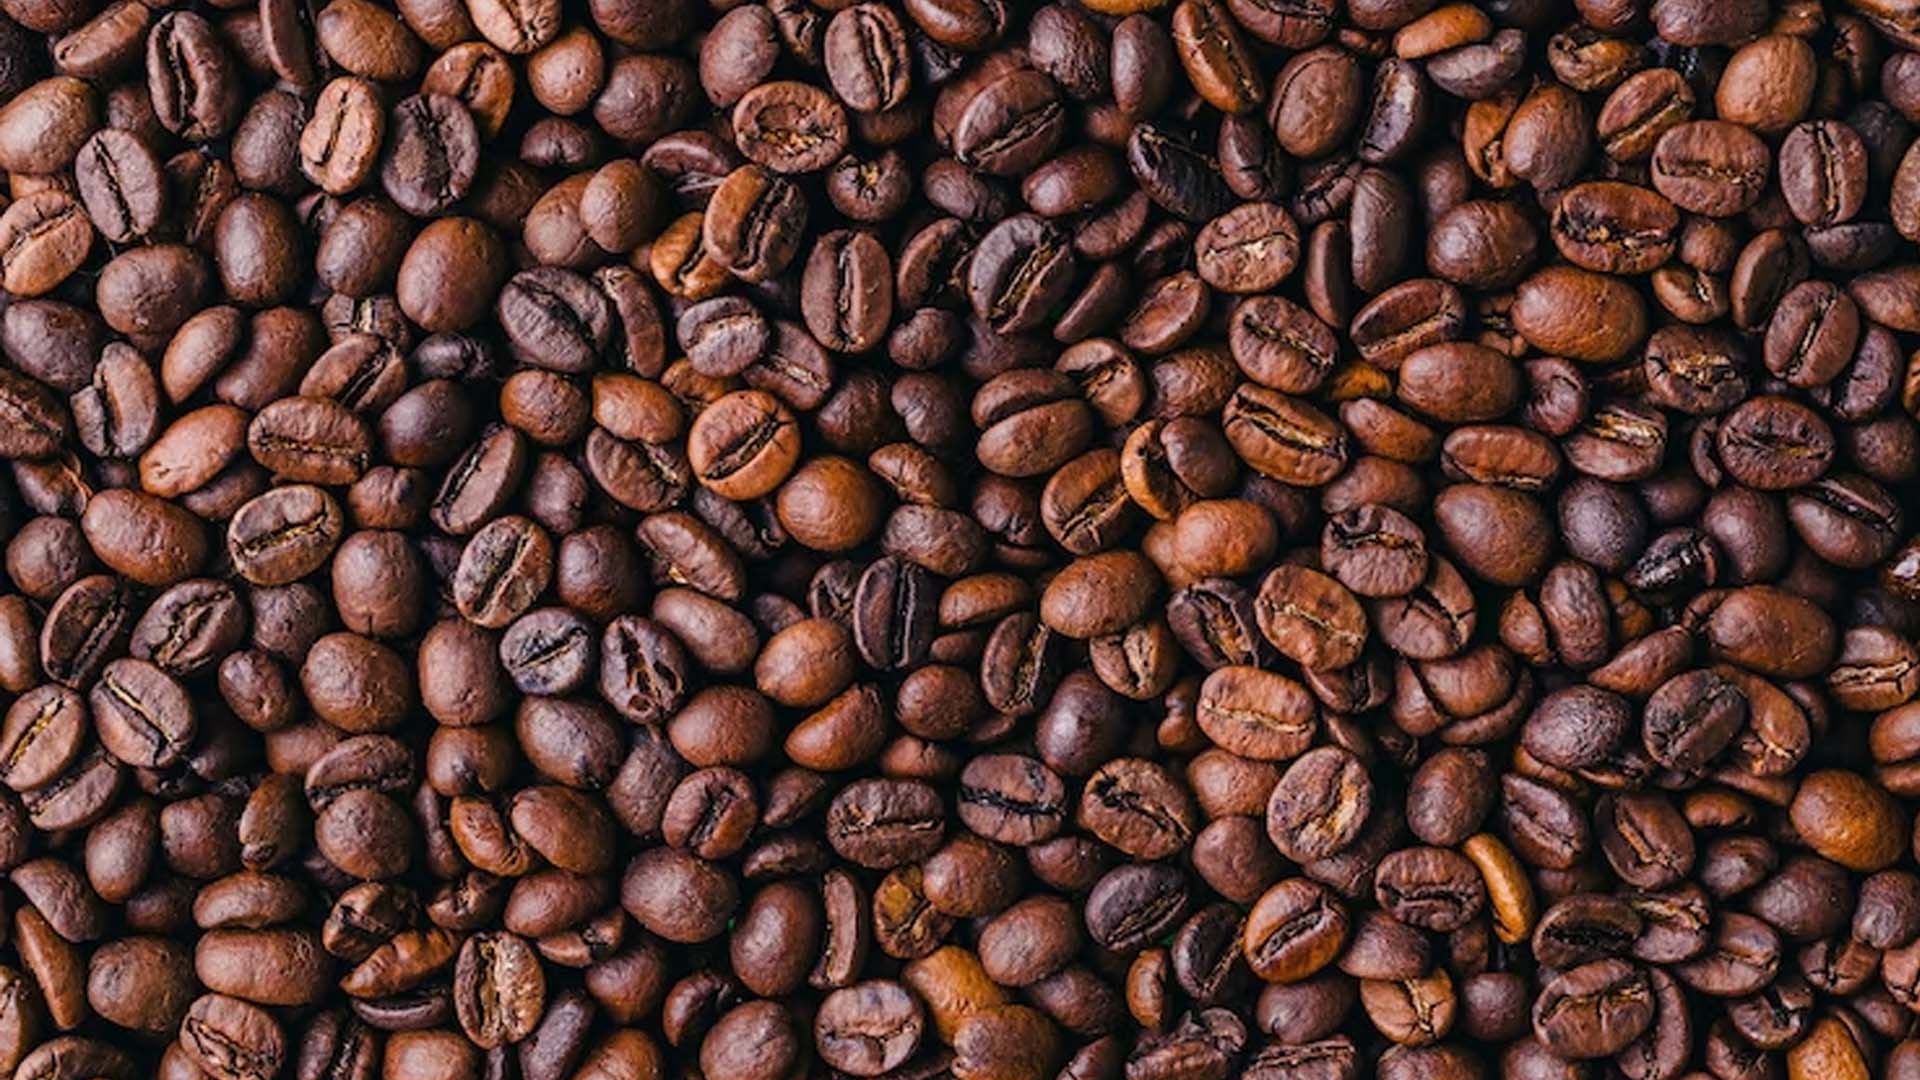 Can You Eat Coffee Beans and Health Benefits of Eating it?